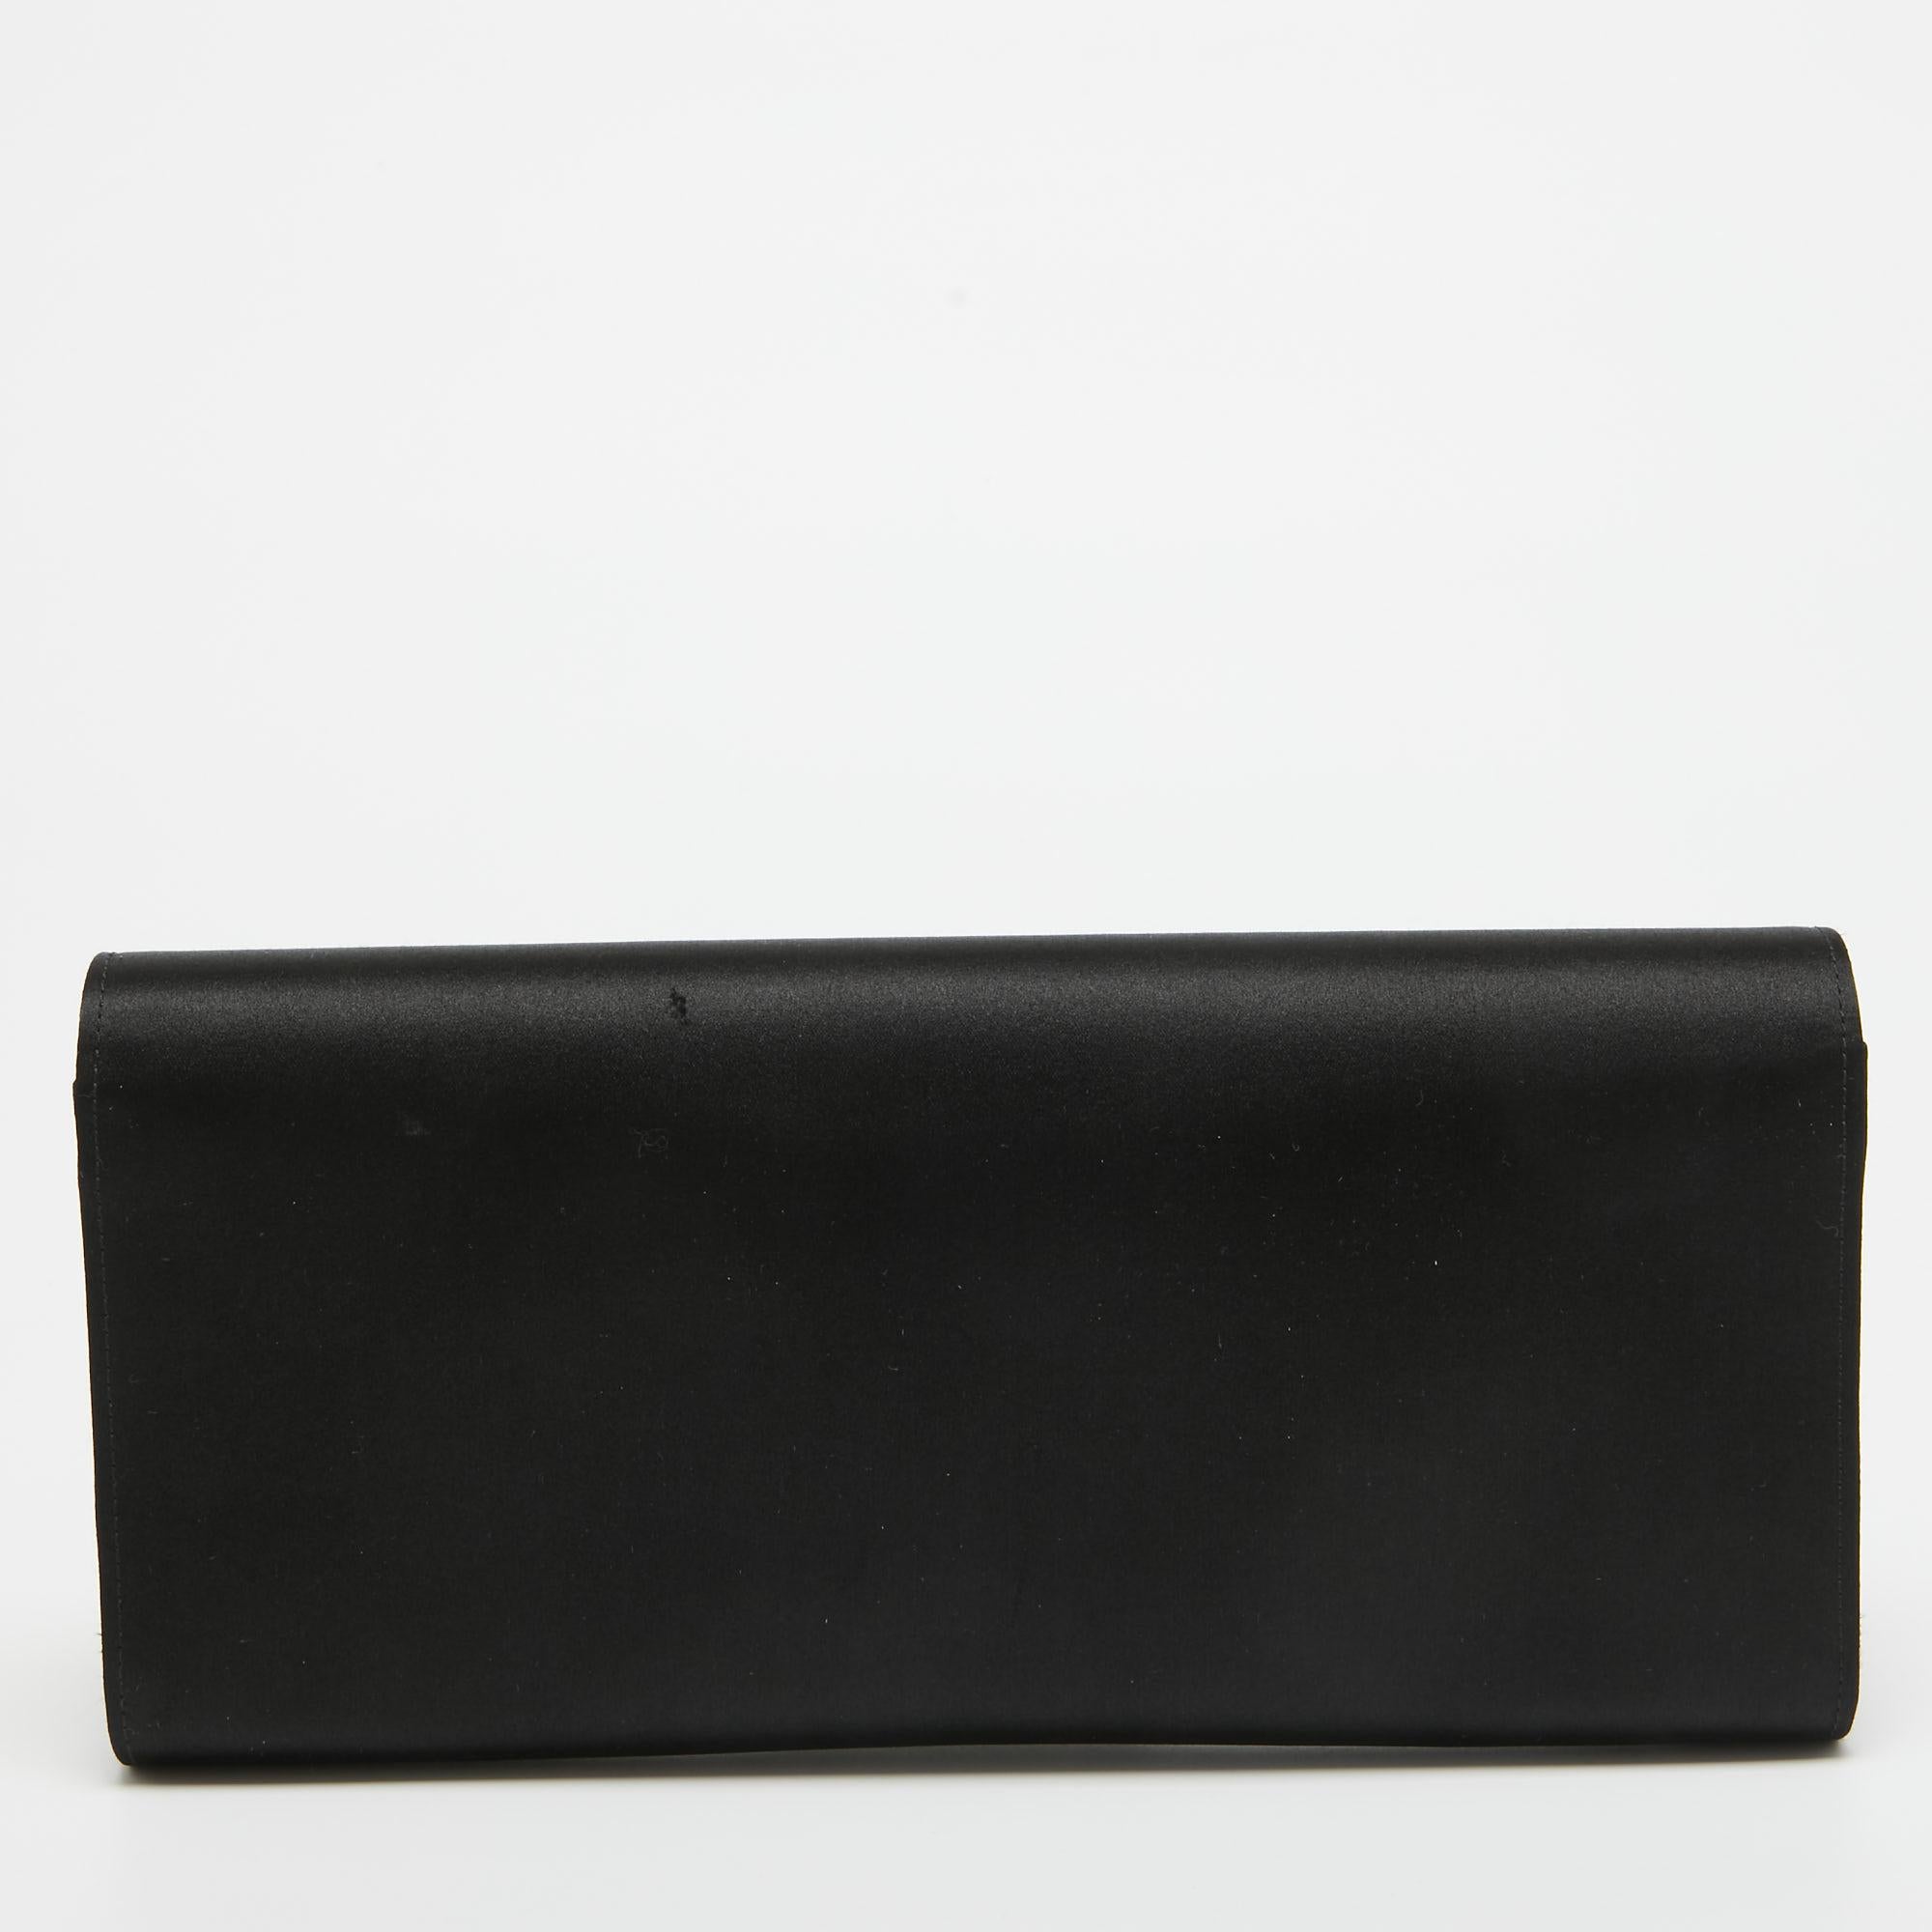 This Gucci black clutch is just the right accessory to complement your chic ensemble. It comes crafted using satin and has a crystal-decked GG motif on the front.

Includes: Original Dustbag, Original Box, Info Booklet

